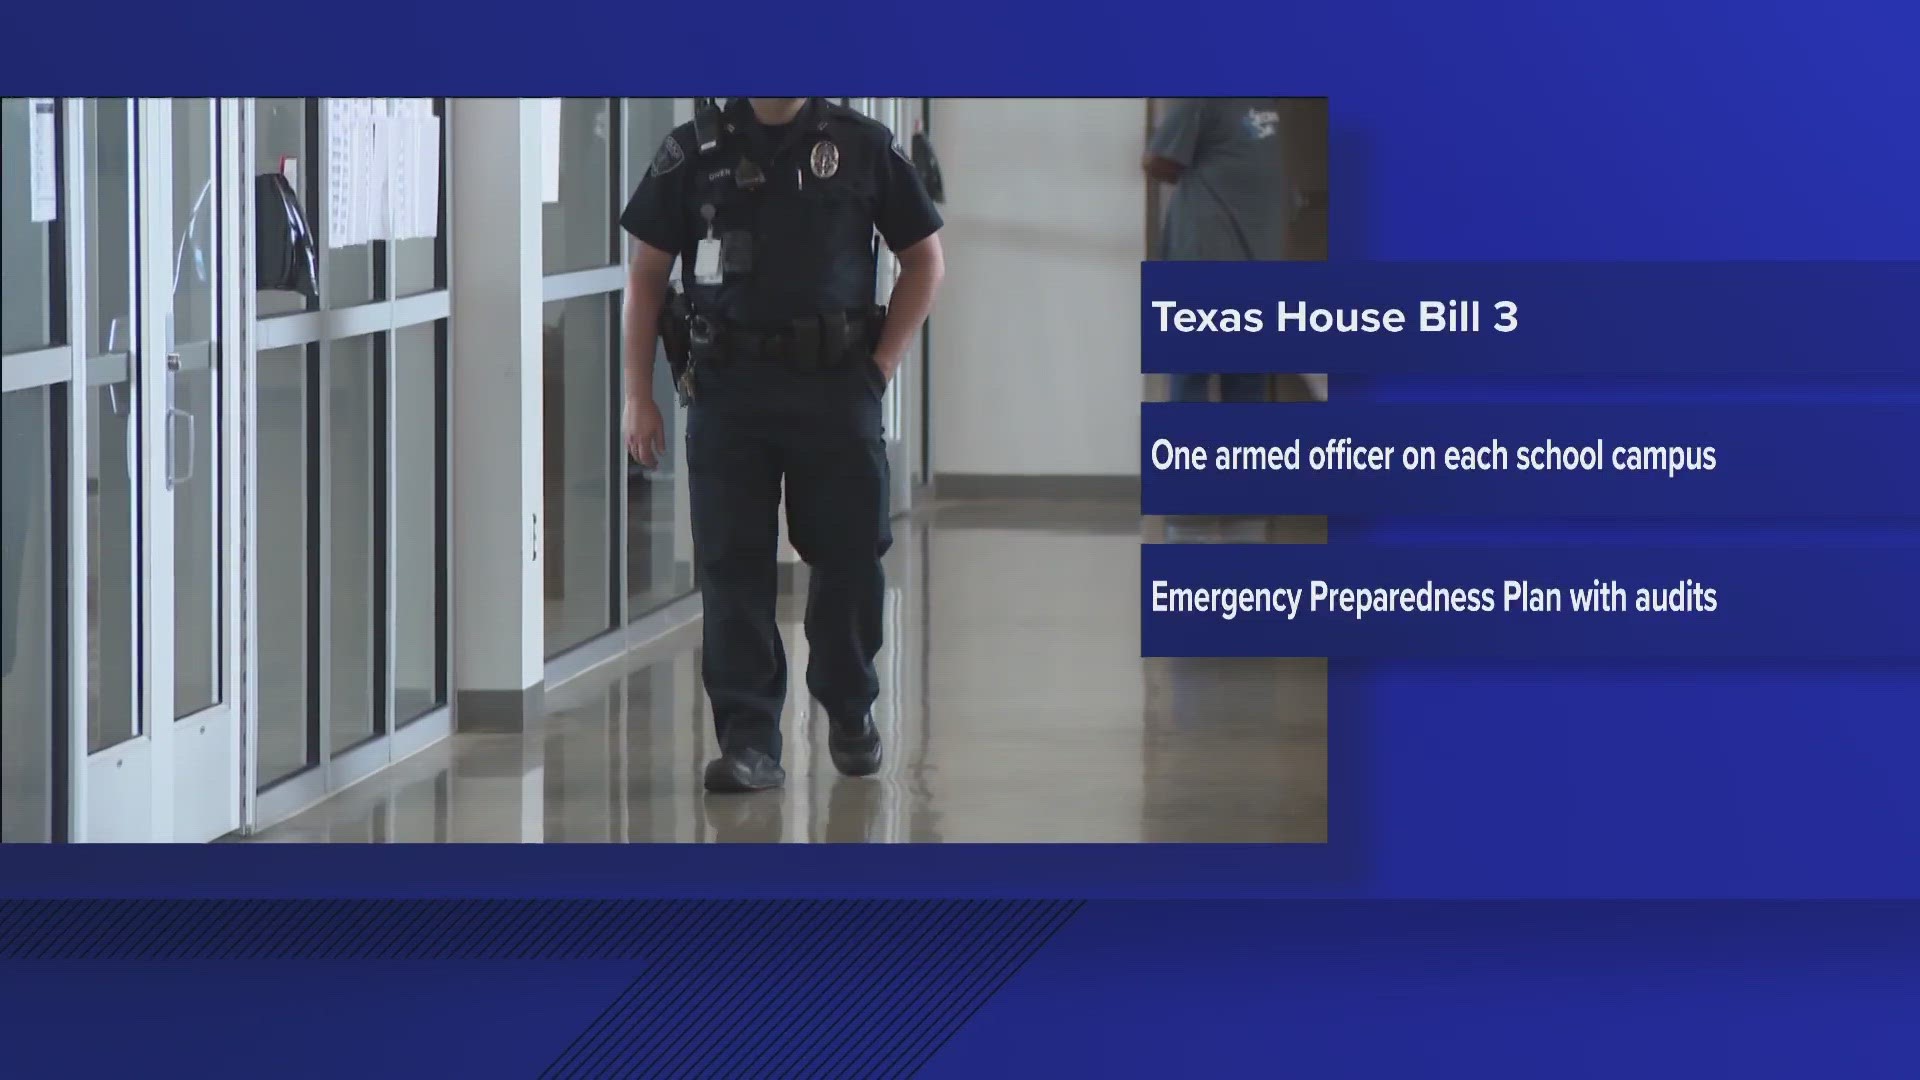 A bill that would require armed security at every Texas school is on its way to the governor's desk.